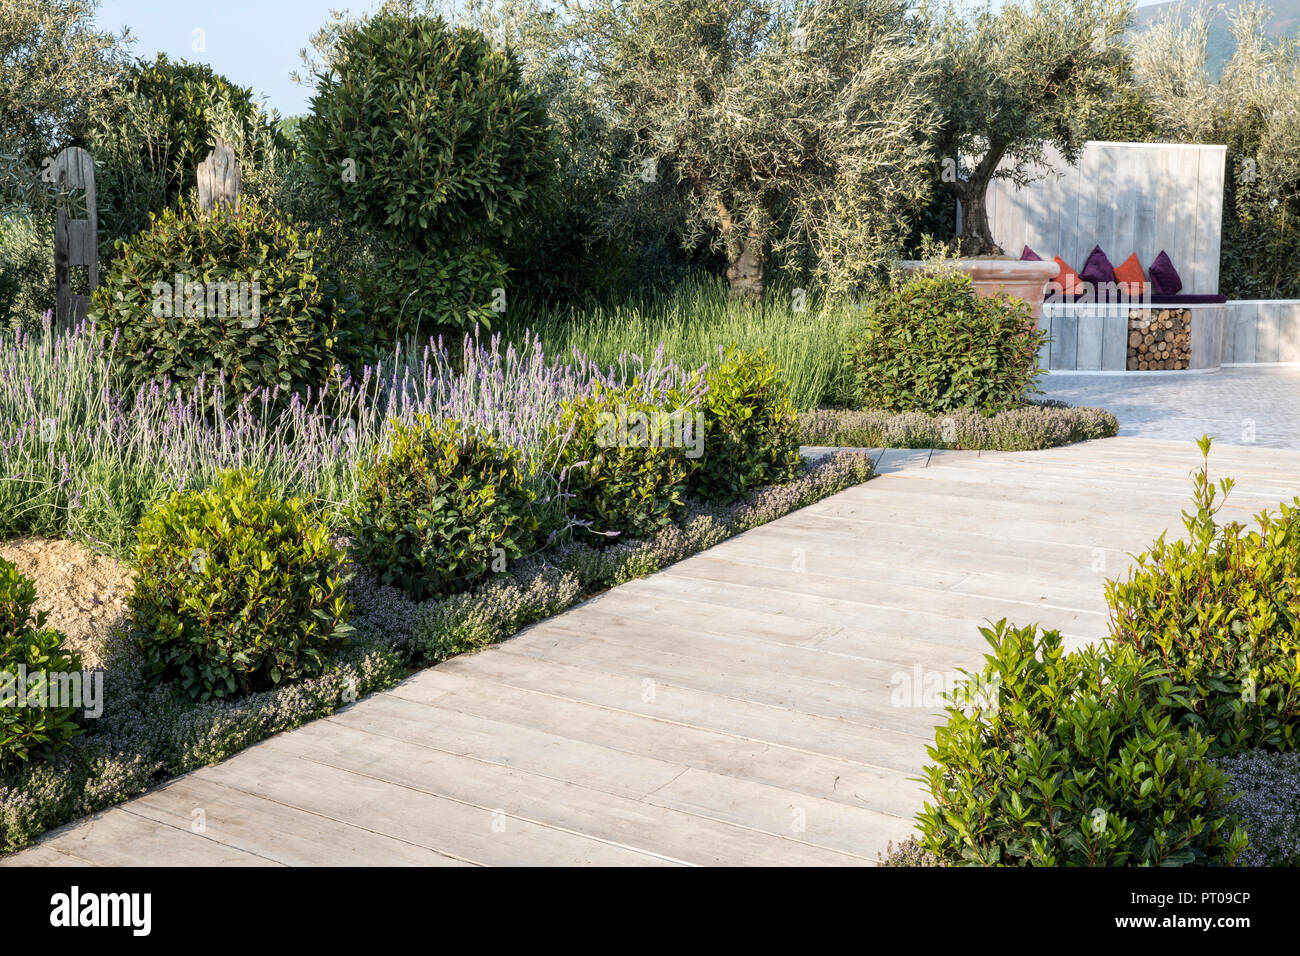 Mediterranean garden with wooden decking path lined with Prunus lusitanica underplanted with Thymus and Lavandula, Olive trees with outdoor seating ar Stock Photo